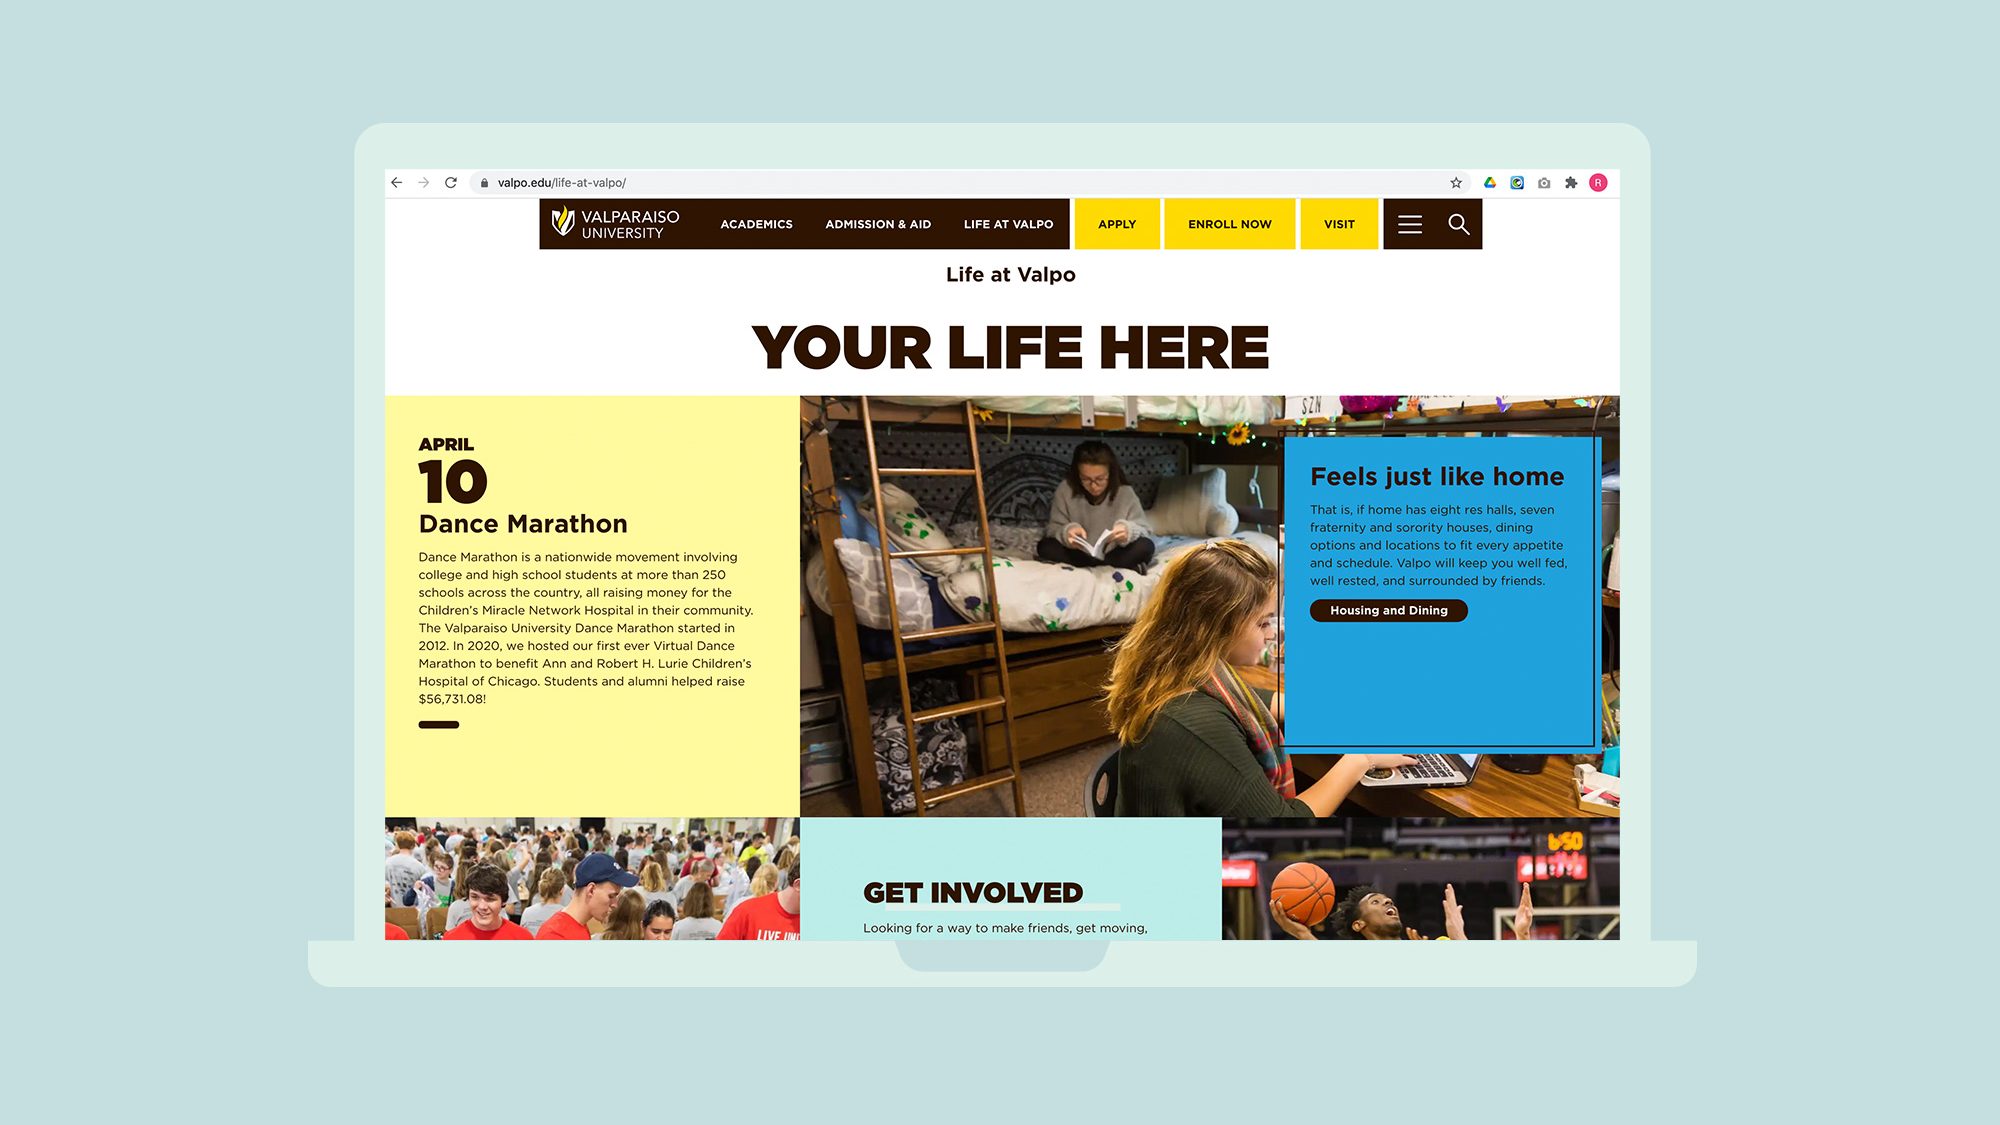 Website screenshot showing student life page.